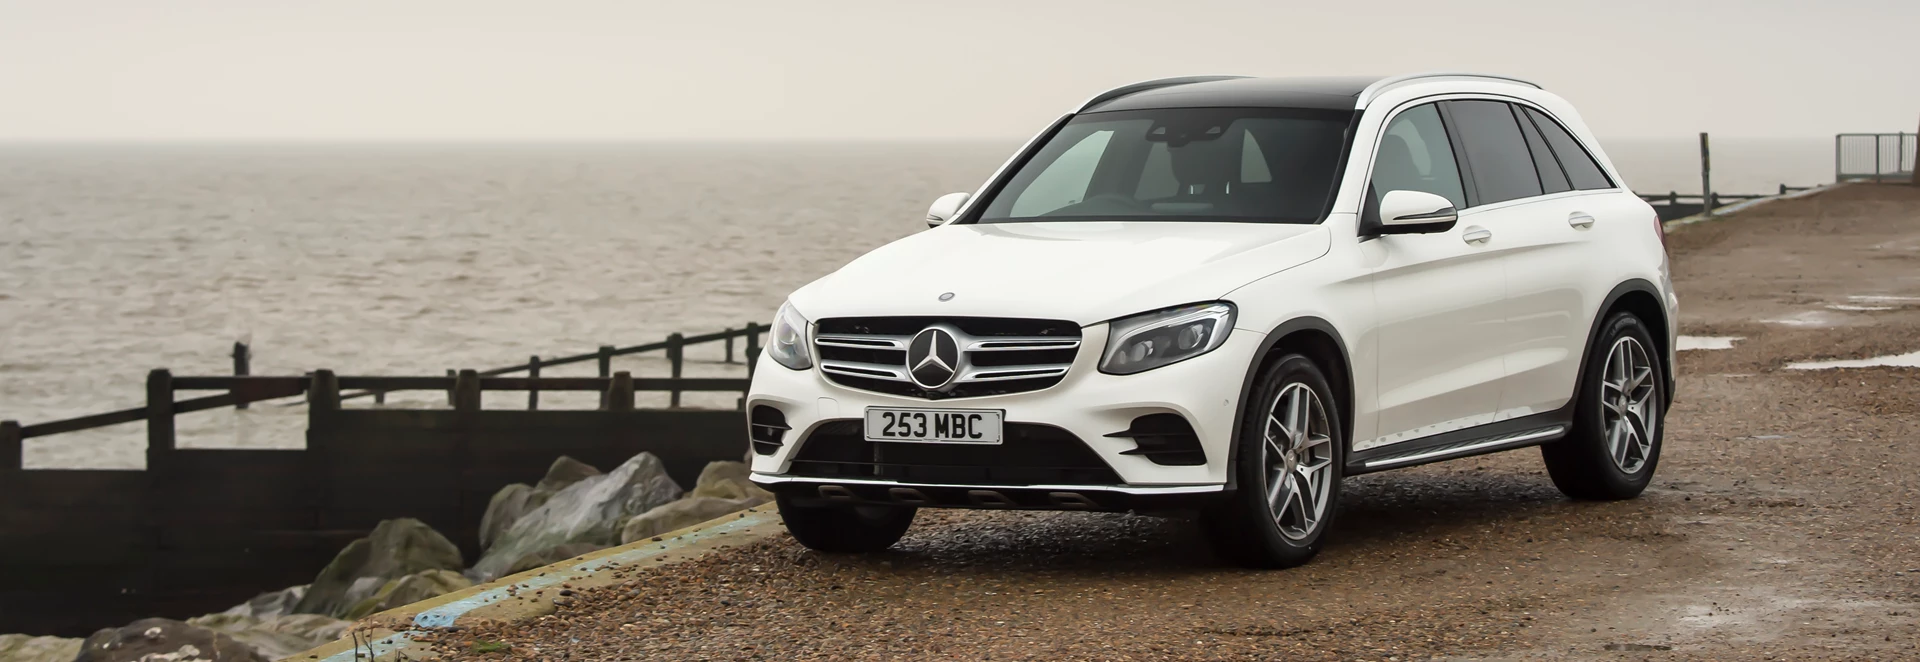 Mercedes achieves record sales and customer satisfaction up 